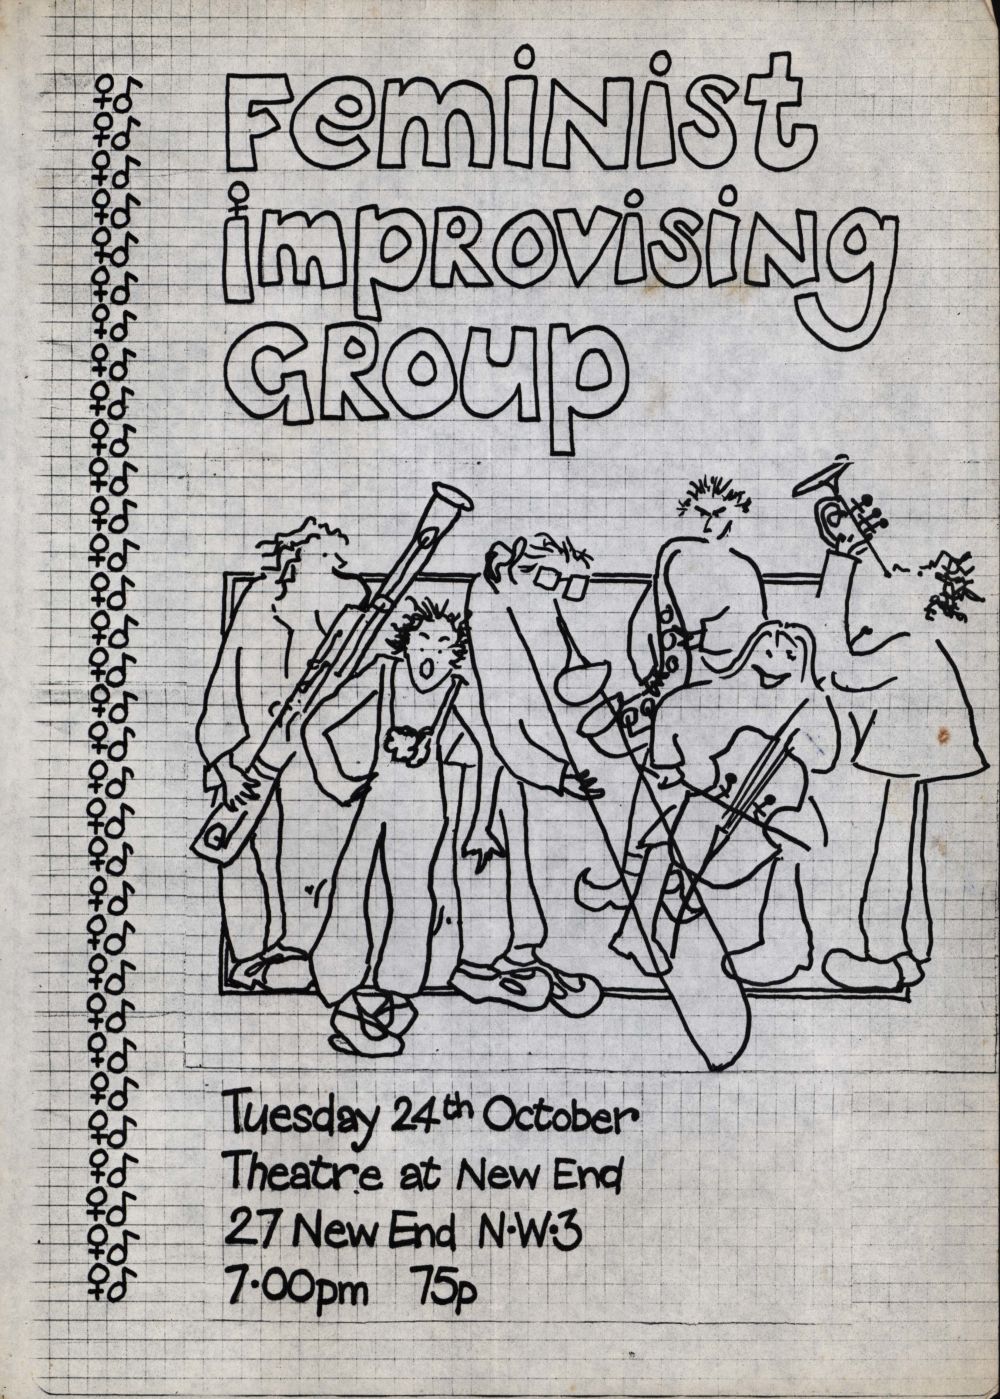 Lindsay Cooper Archive, Feminist Improvising Group drawing